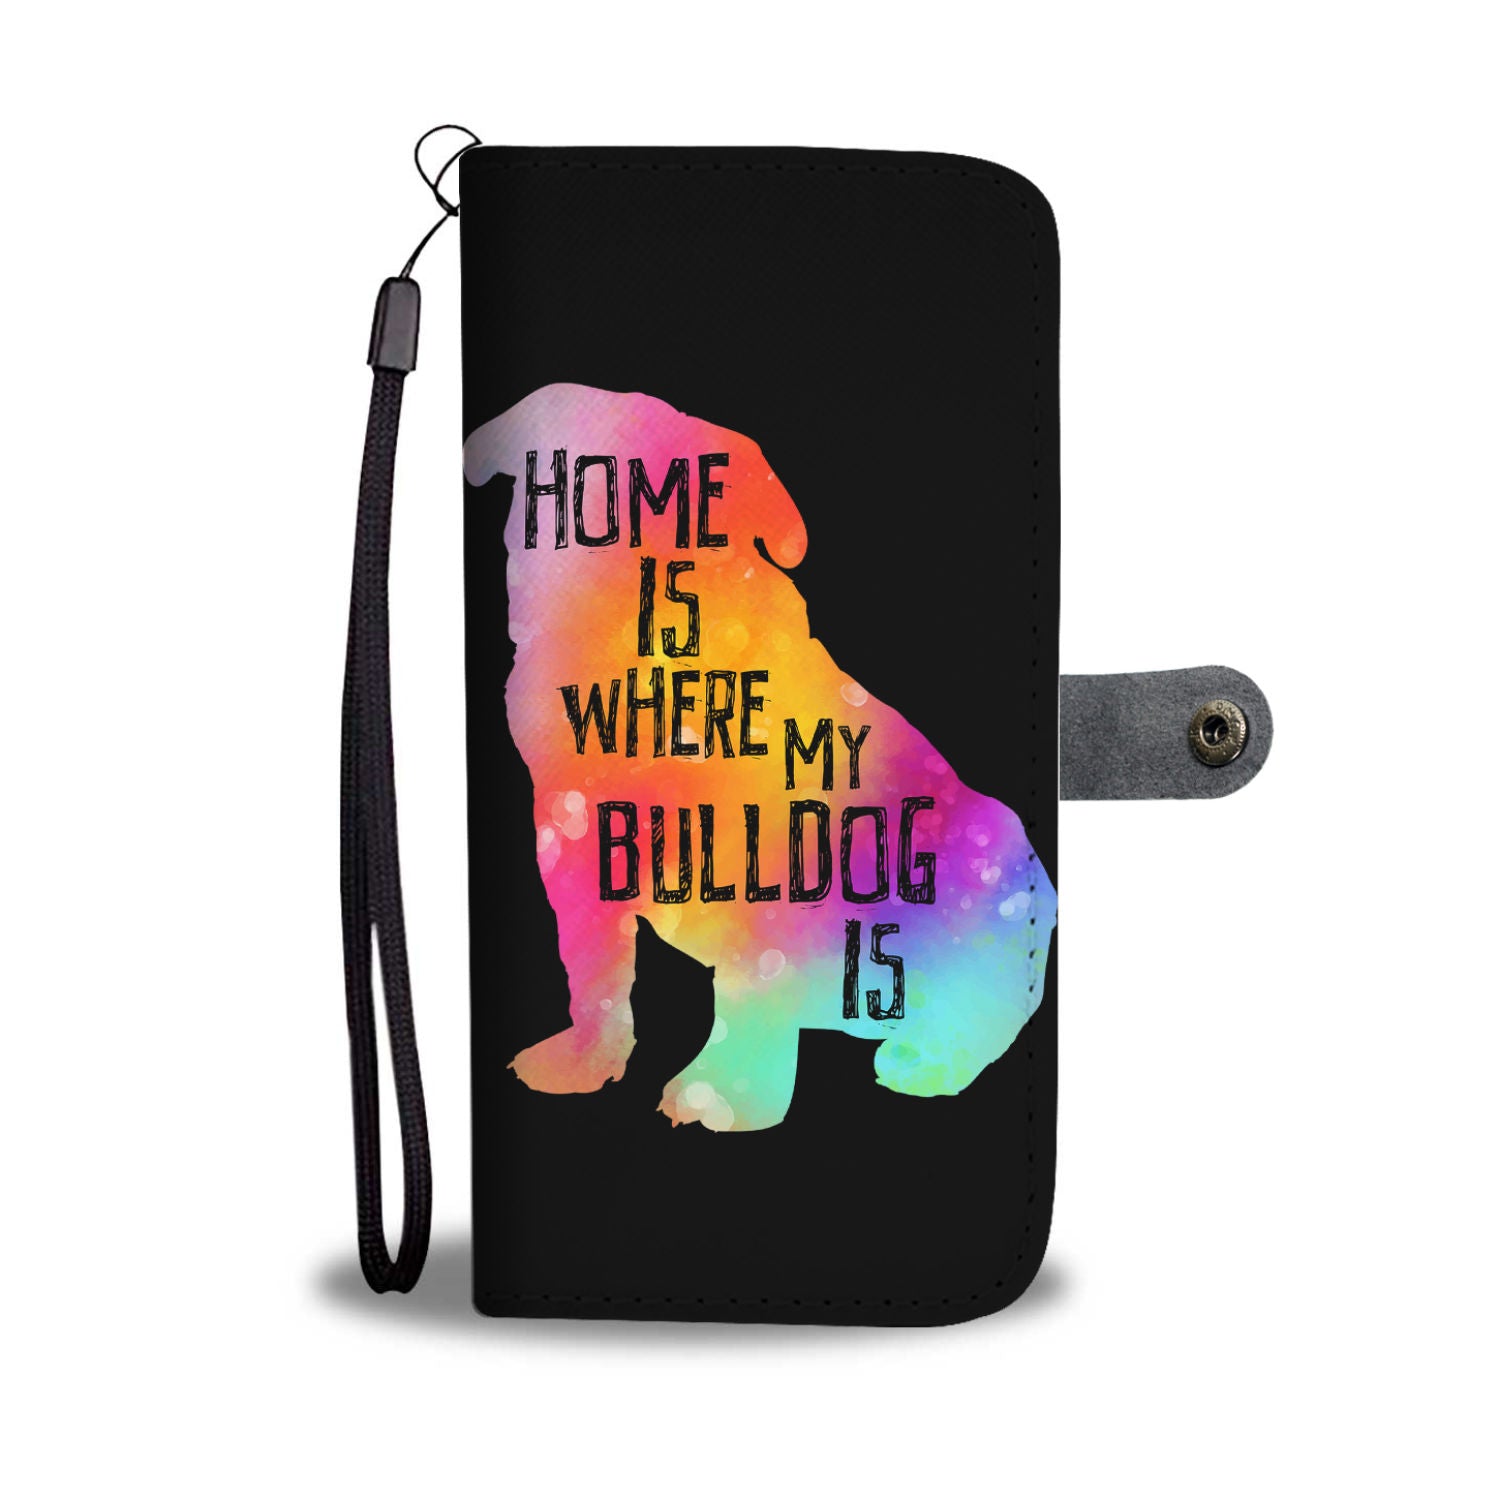 Home Is Where My Bulldog Is Wallet Phone Case